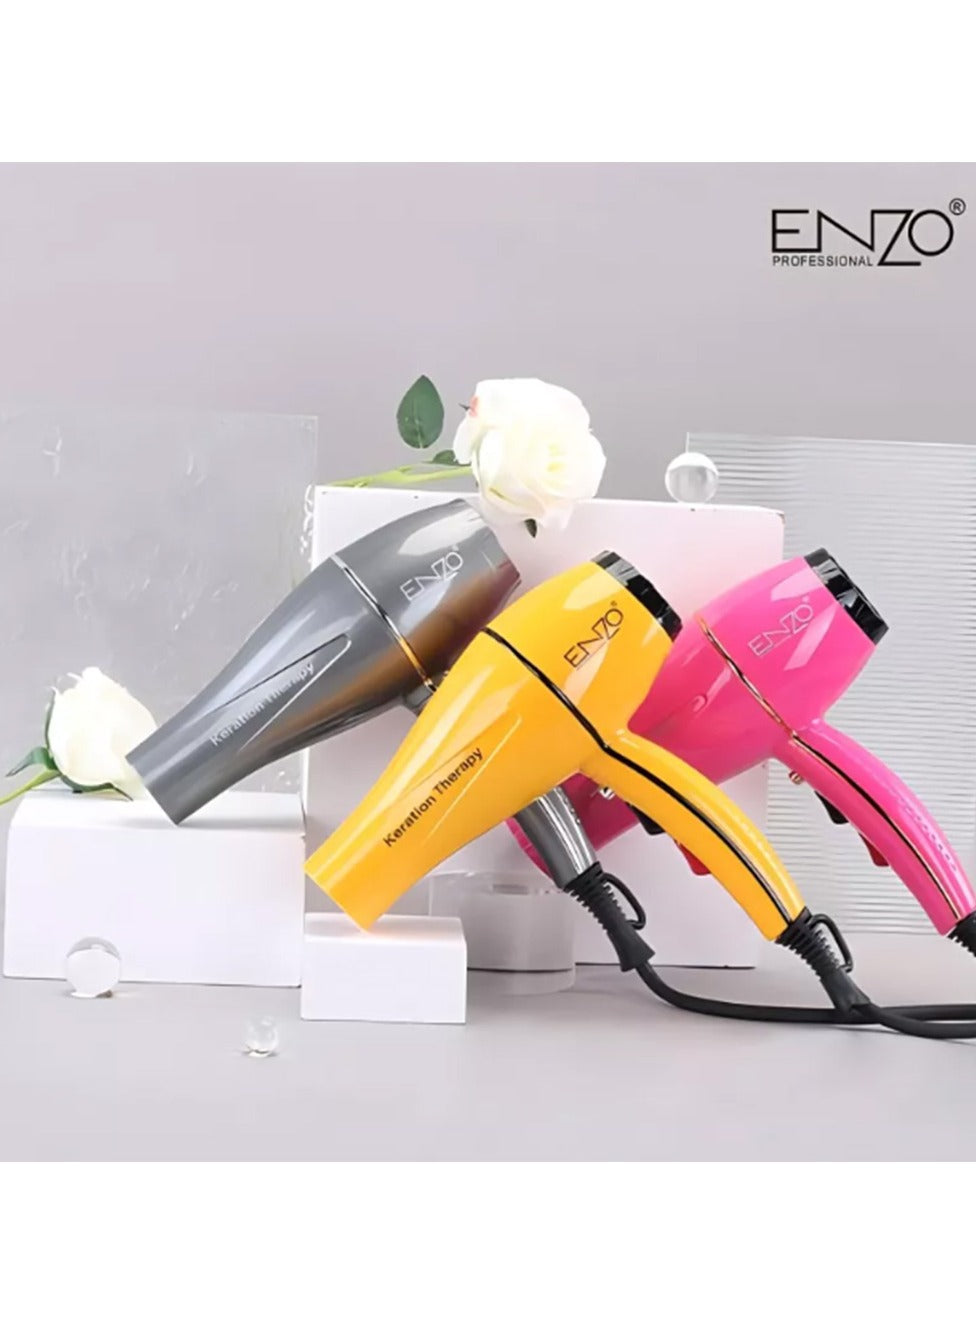 ENZO Professional Hair Dryer 1845W , High Power Home Hair Styling Tool , Gray